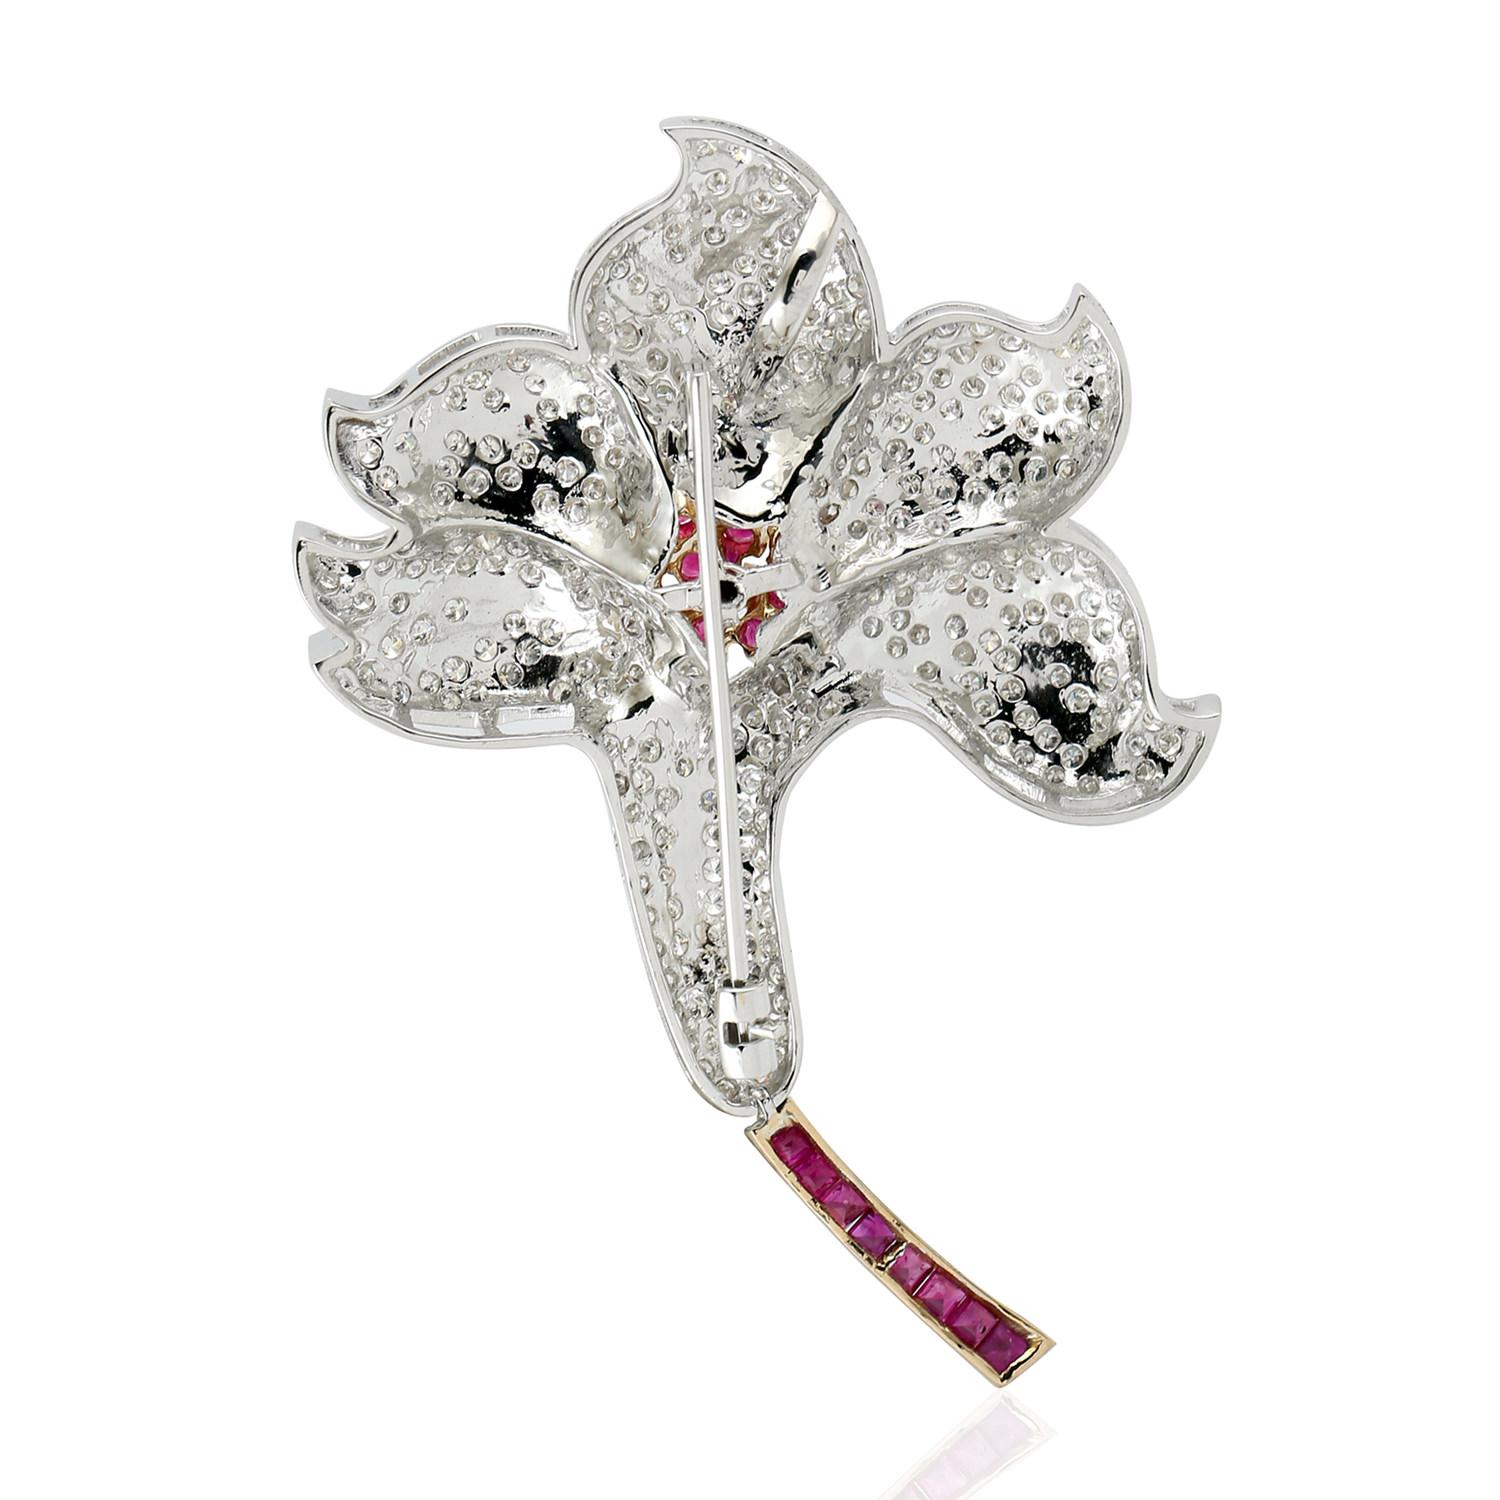 Cast in 18K gold, a stunning brooch hand set in 1.57 carats ruby and 3.29 carats of sparkling diamonds.

FOLLOW  MEGHNA JEWELS storefront to view the latest collection & exclusive pieces.  Meghna Jewels is proudly rated as a Top Seller on 1stdibs